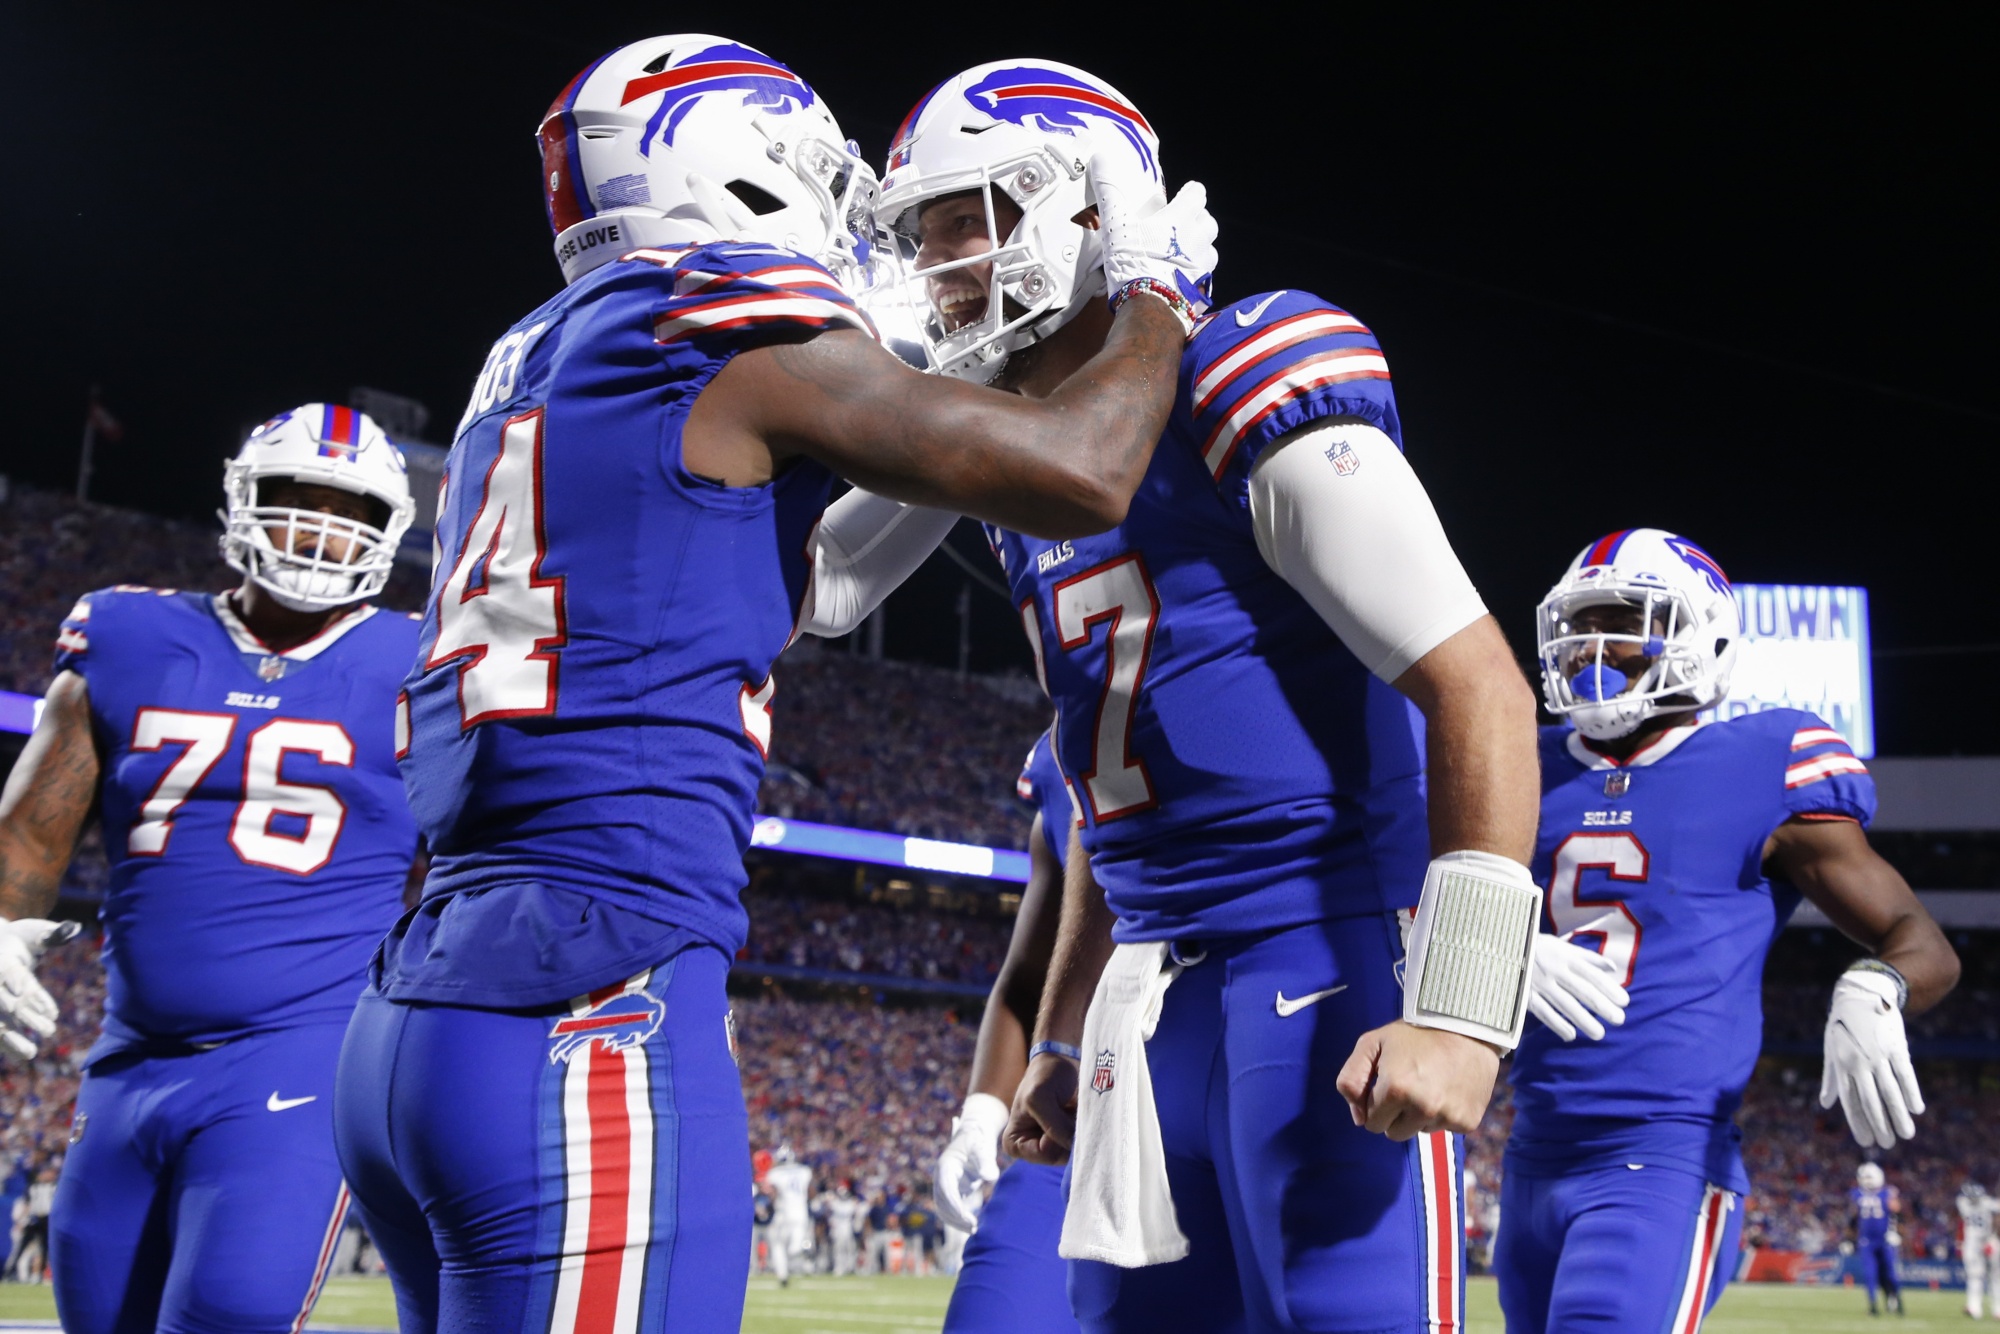 Diggs Scores 3 TDs for Bills in 41-7 Rout of Titans - Bloomberg